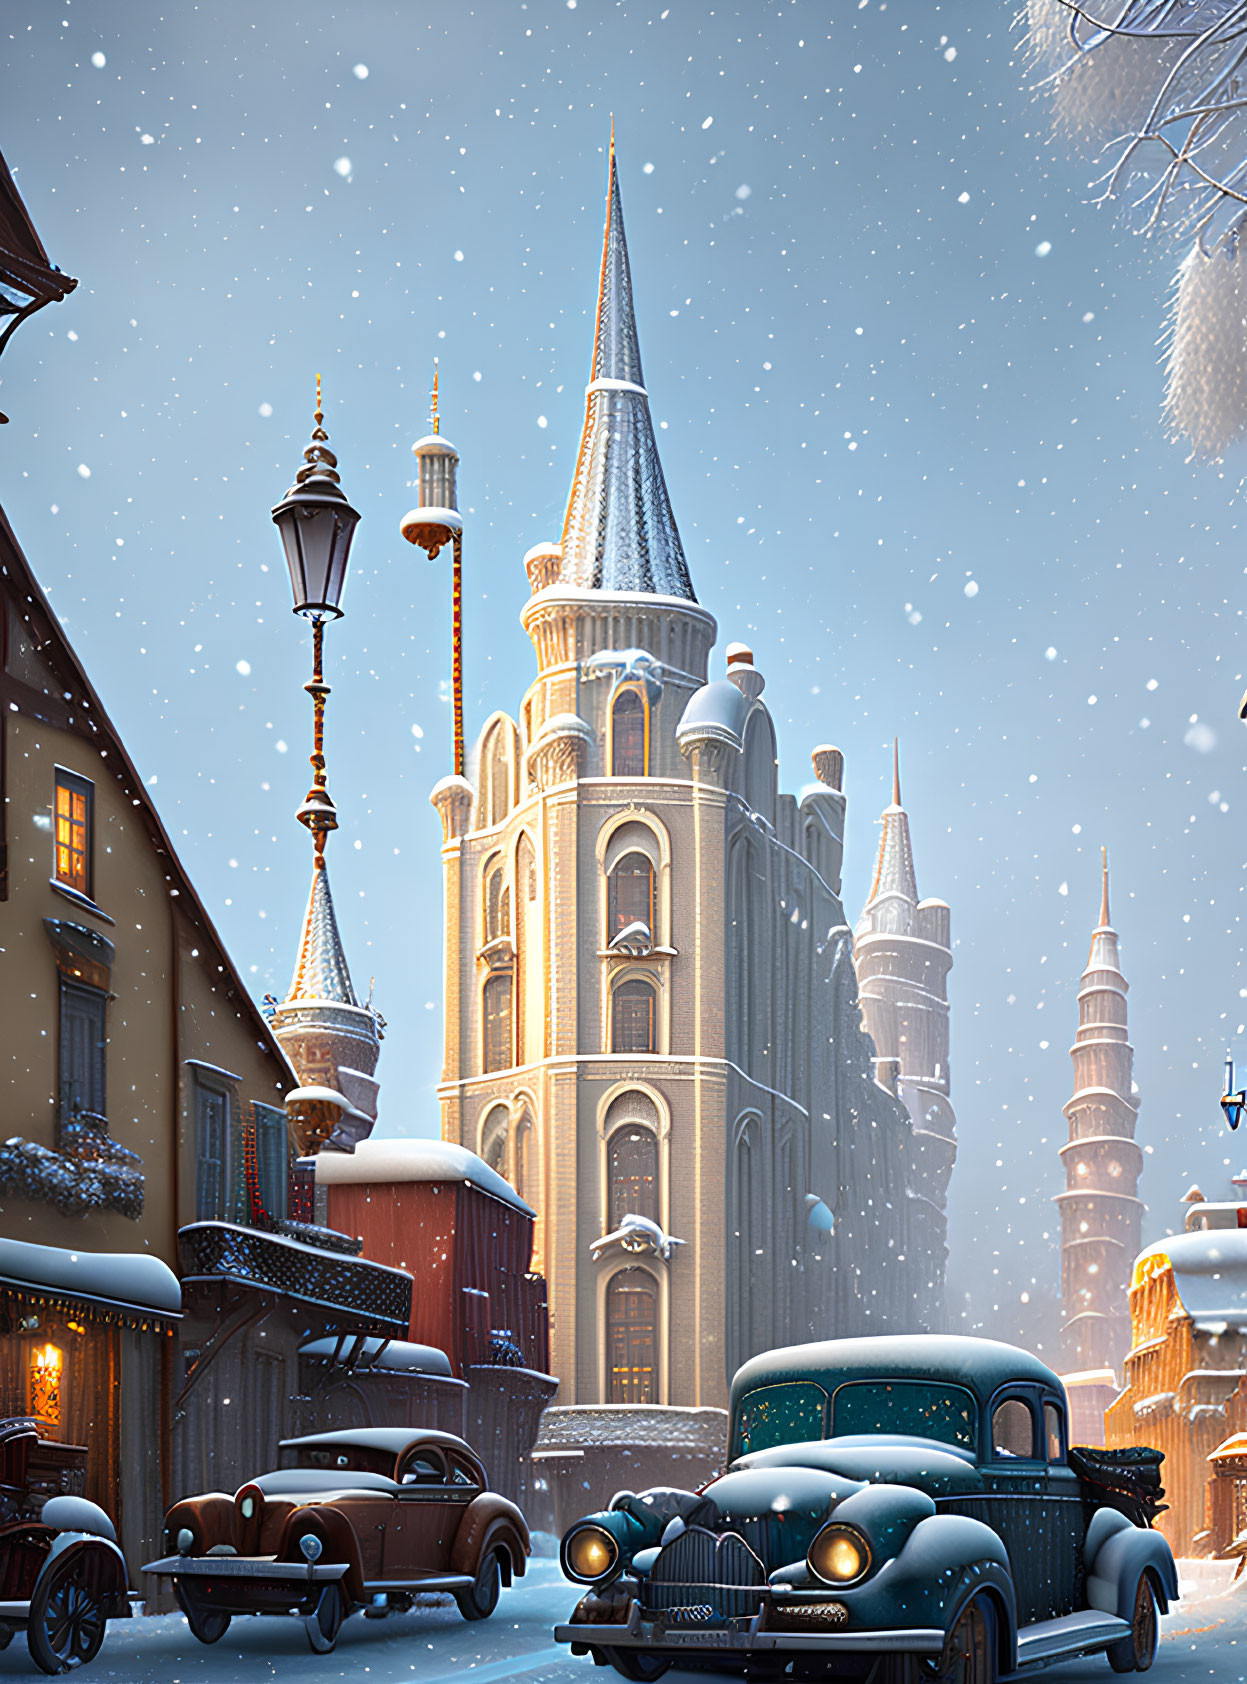 Vintage-style snowy scene with old-fashioned cars, ornate building, and street lamps.